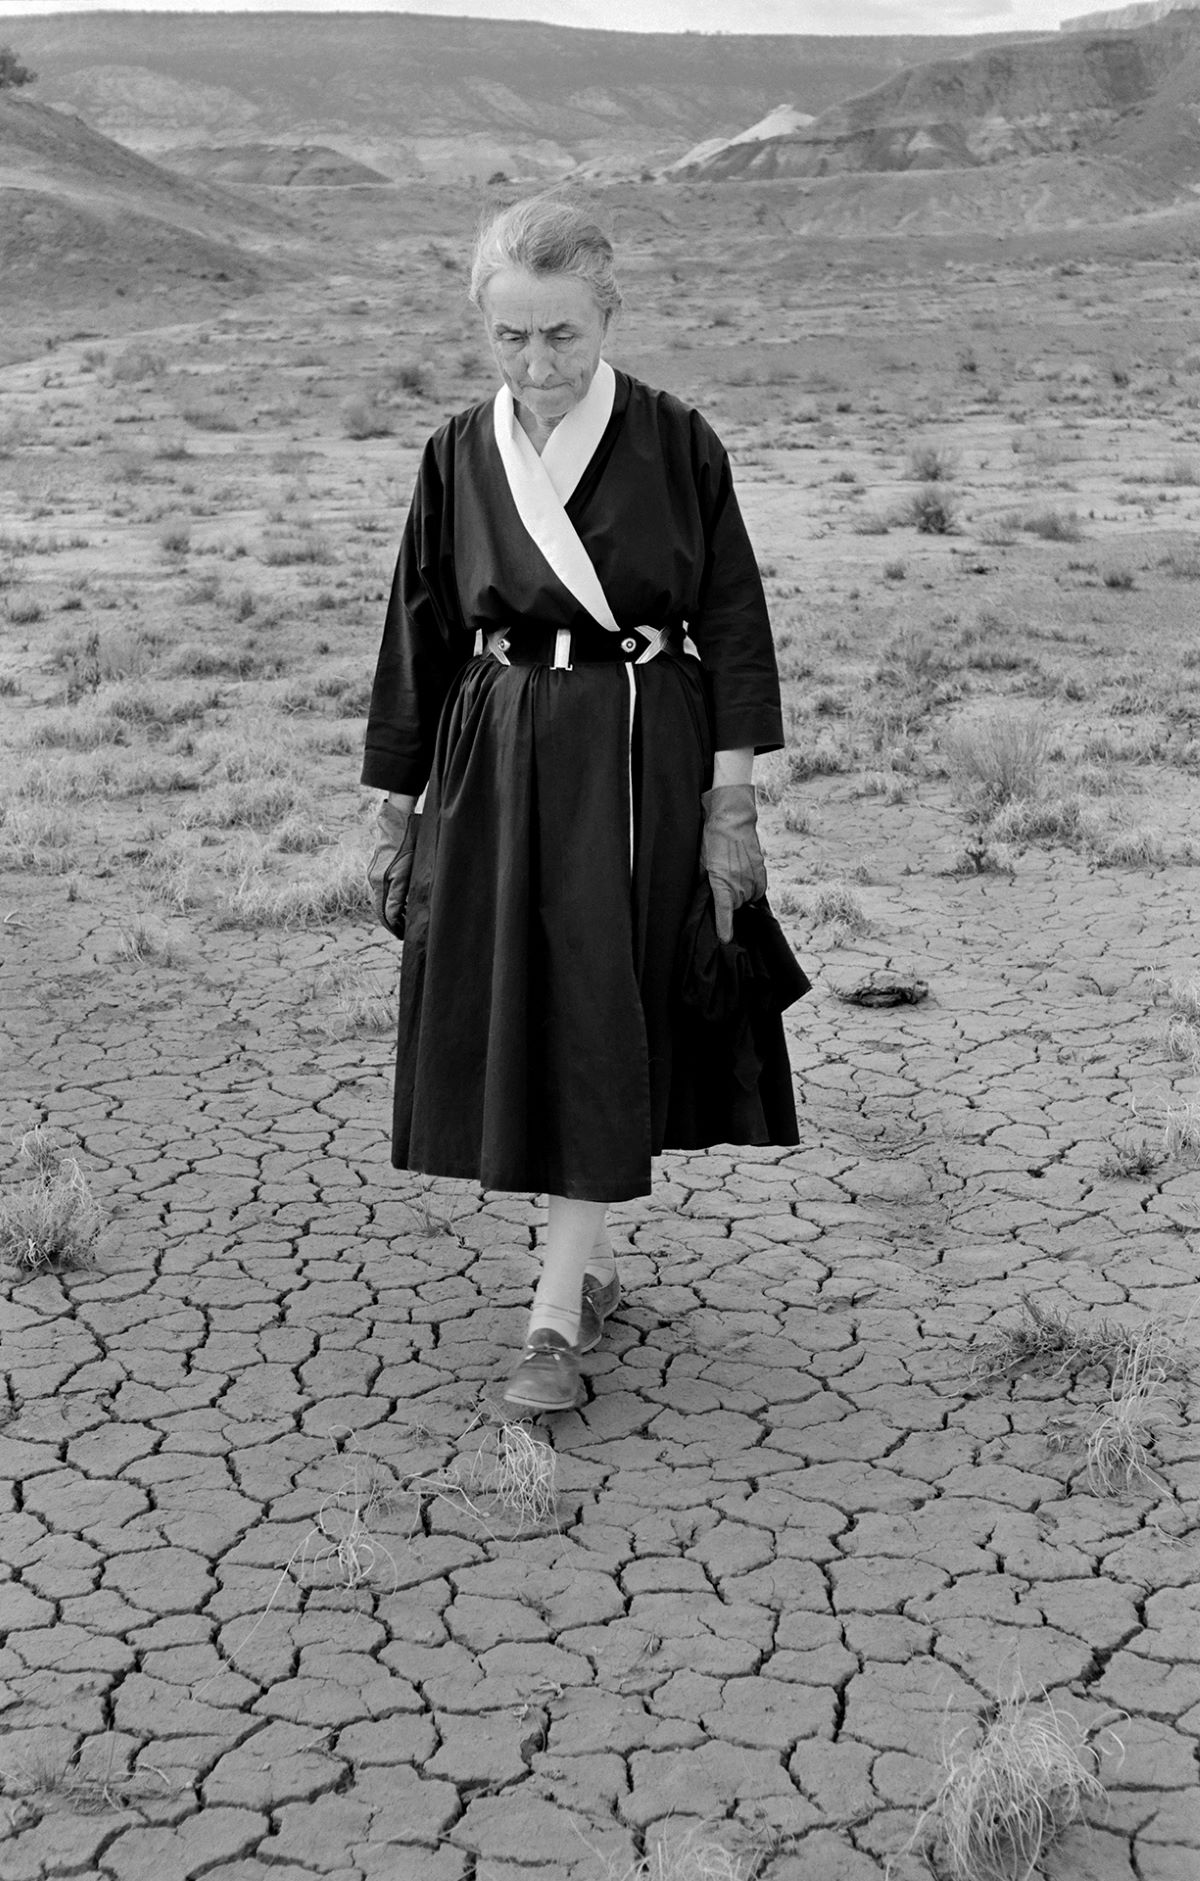 Georgia O'Keeffe thinking during her walk, New Mexico, 1960